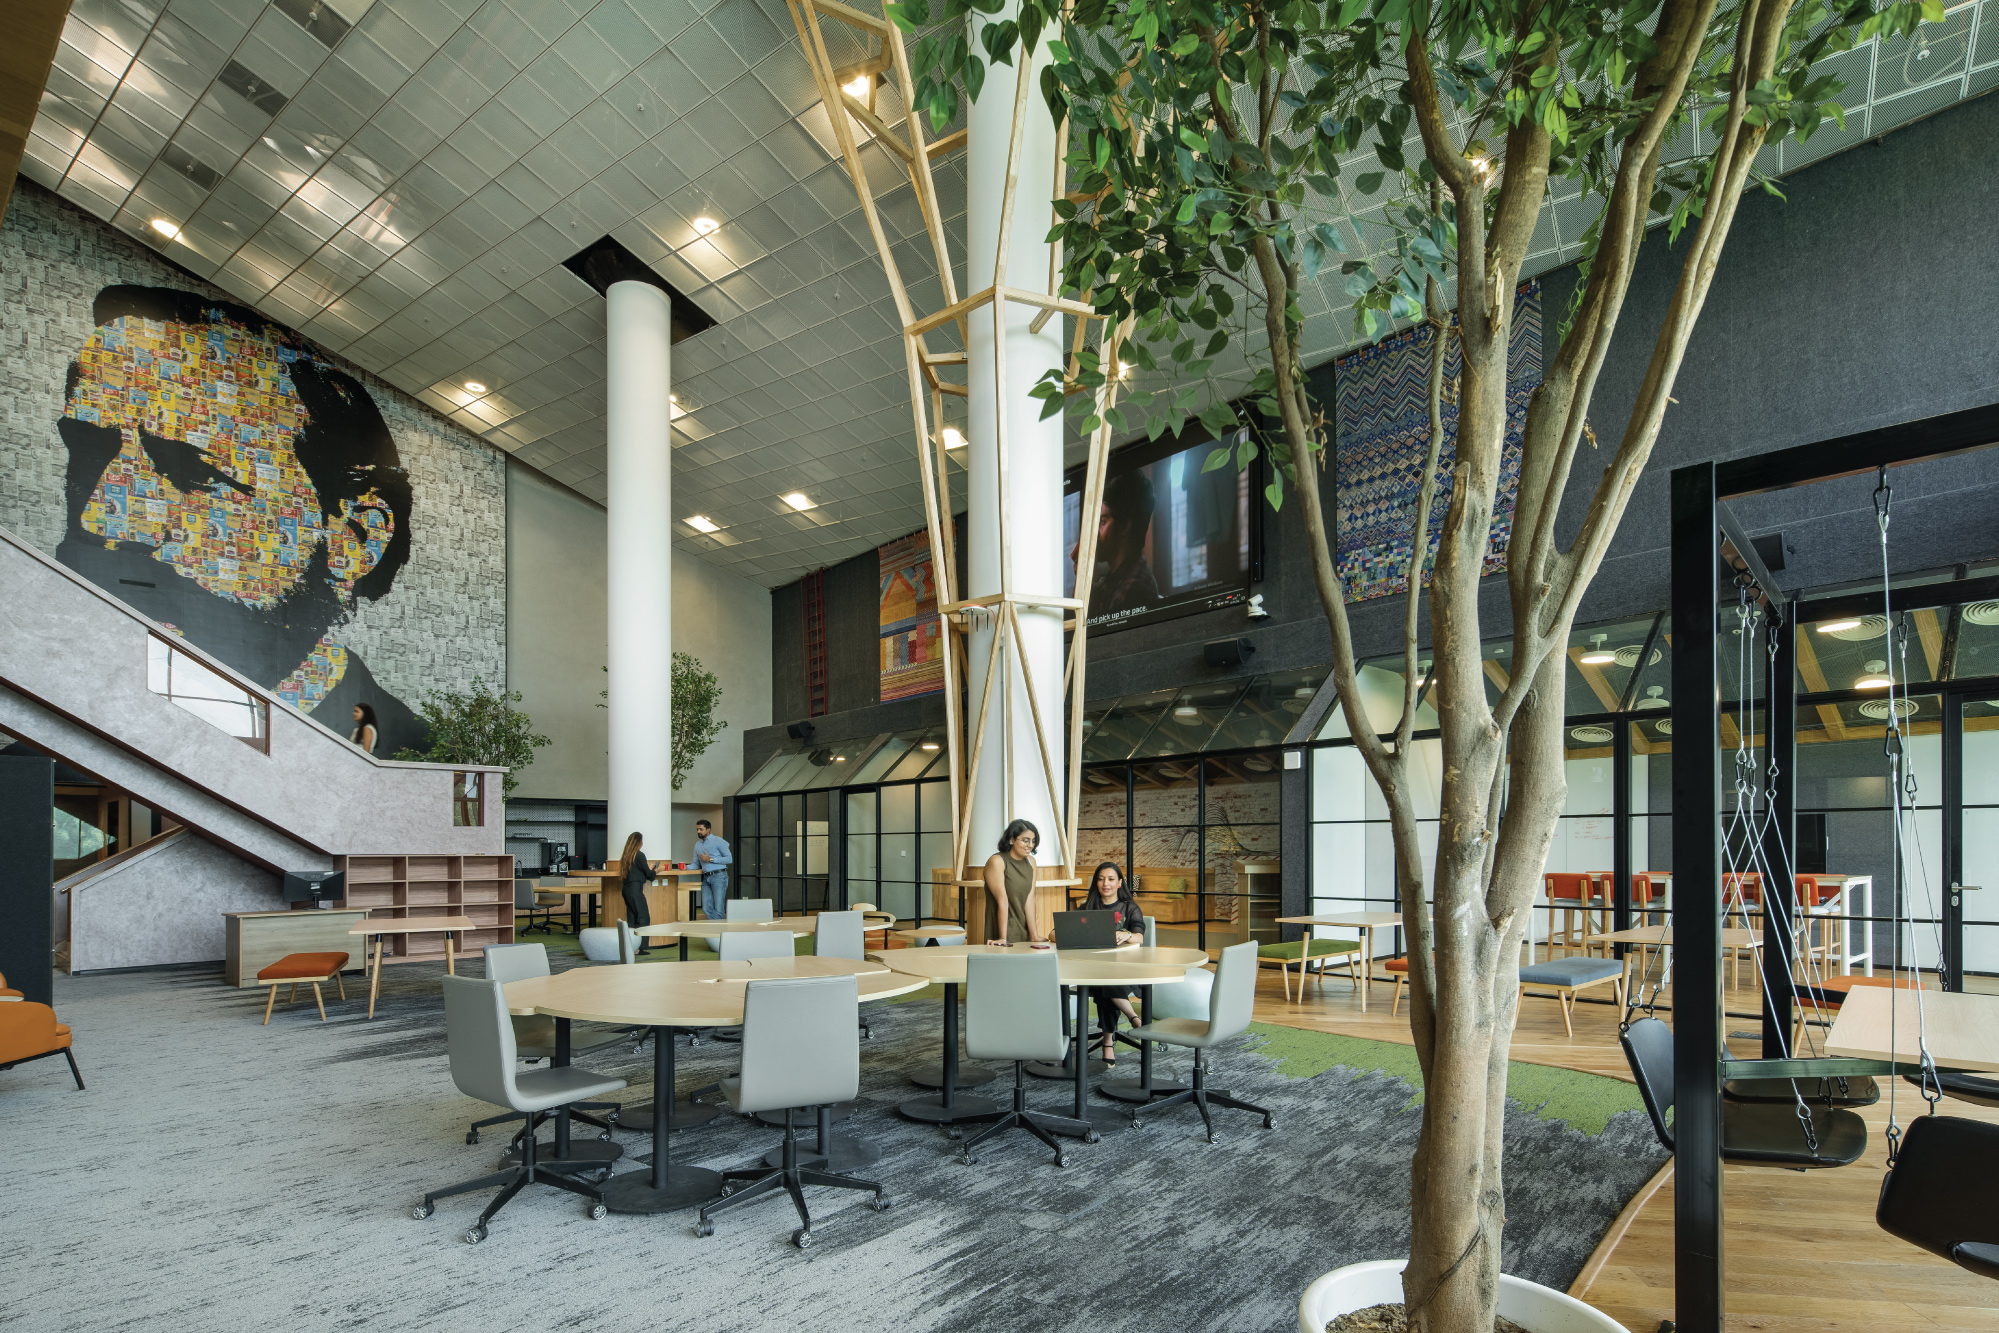 Ceridian new workplace - office space with a fresh and innovative representation of the brand and its growth.